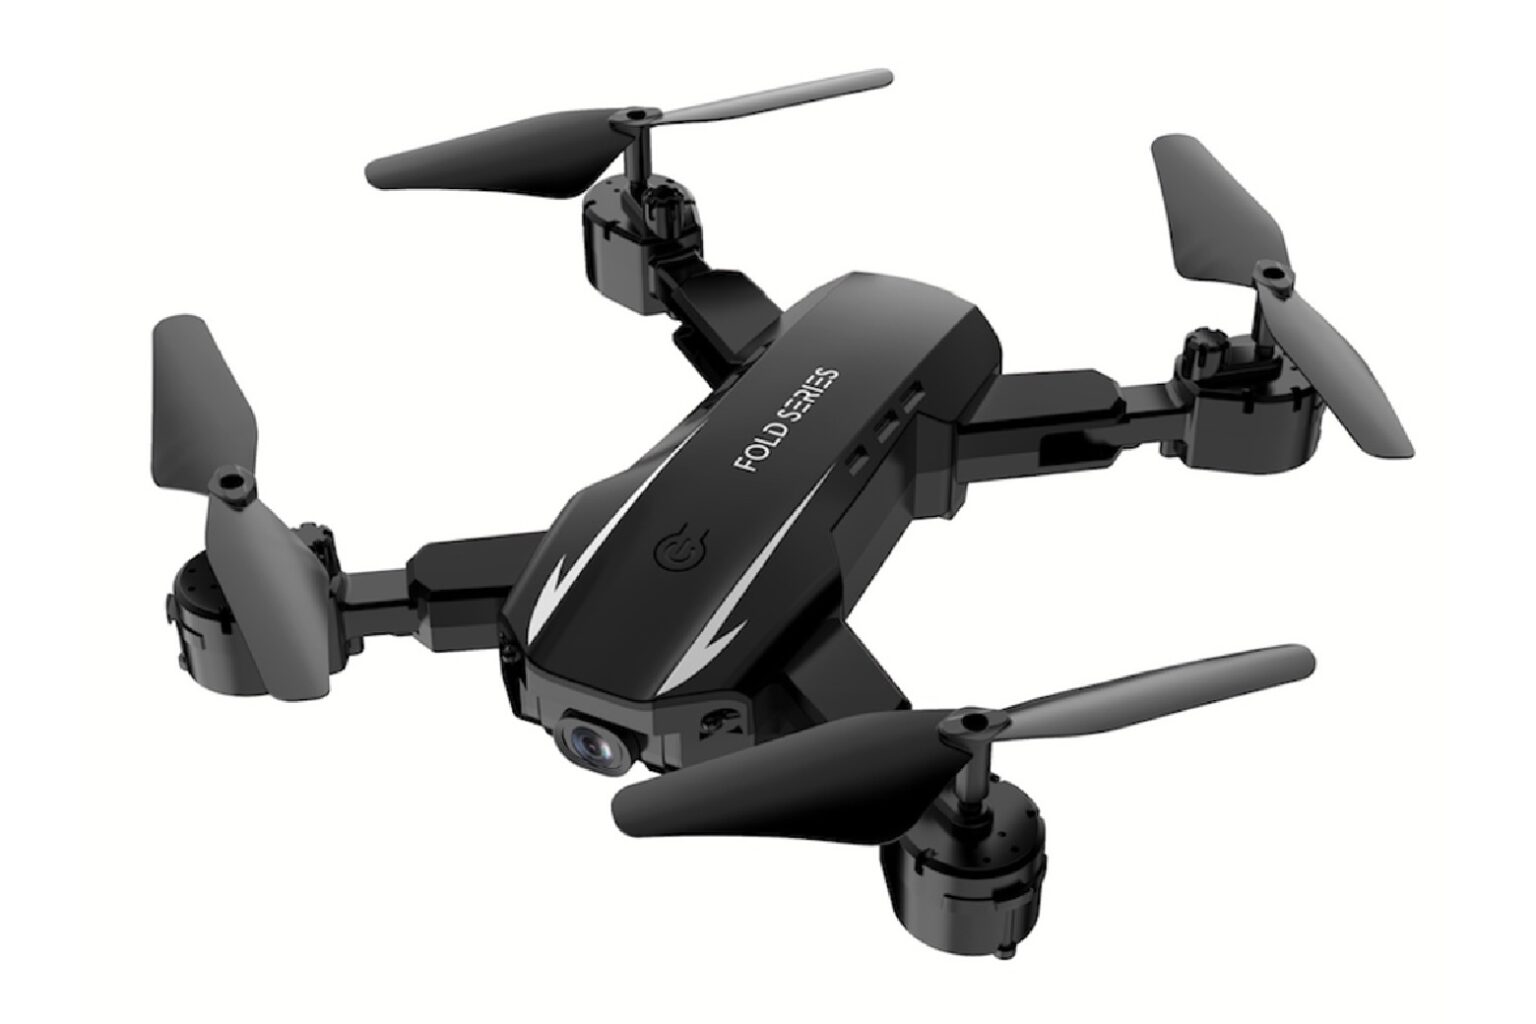 Act fast to get $10 off Ninja Dragons dual-camera drone with 1-click launch.